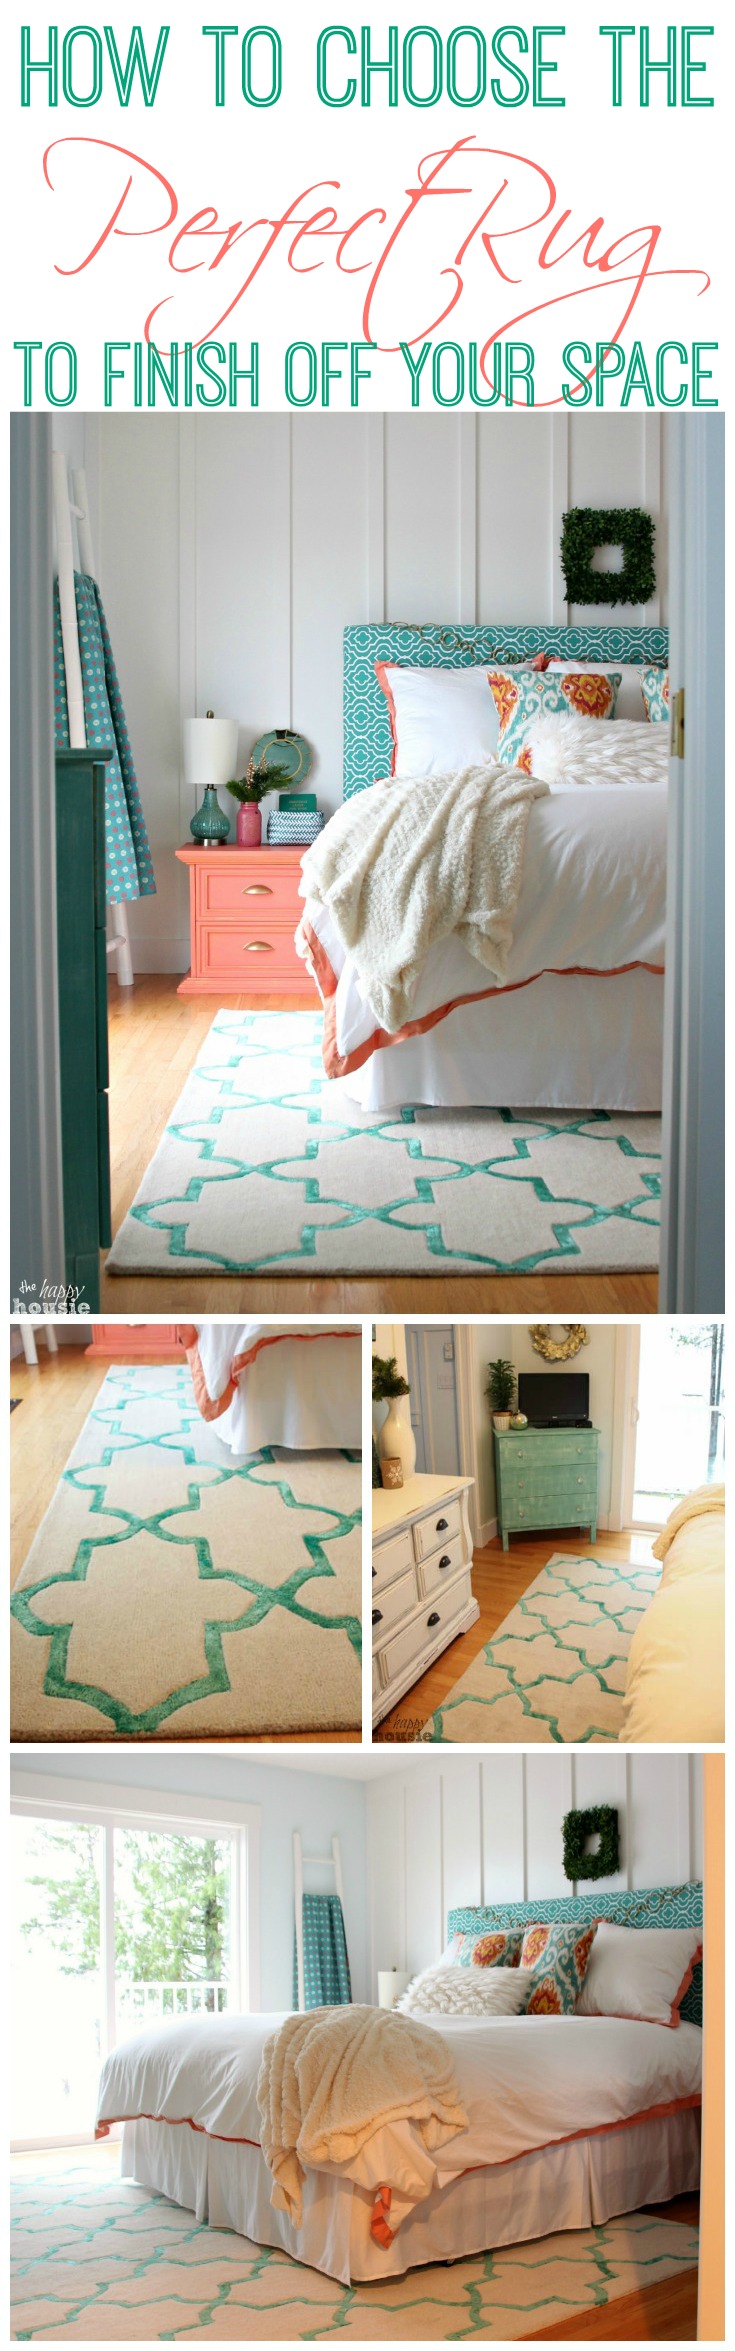 How to choose the perfect rug to finish off your space at The Happy Housie poster.